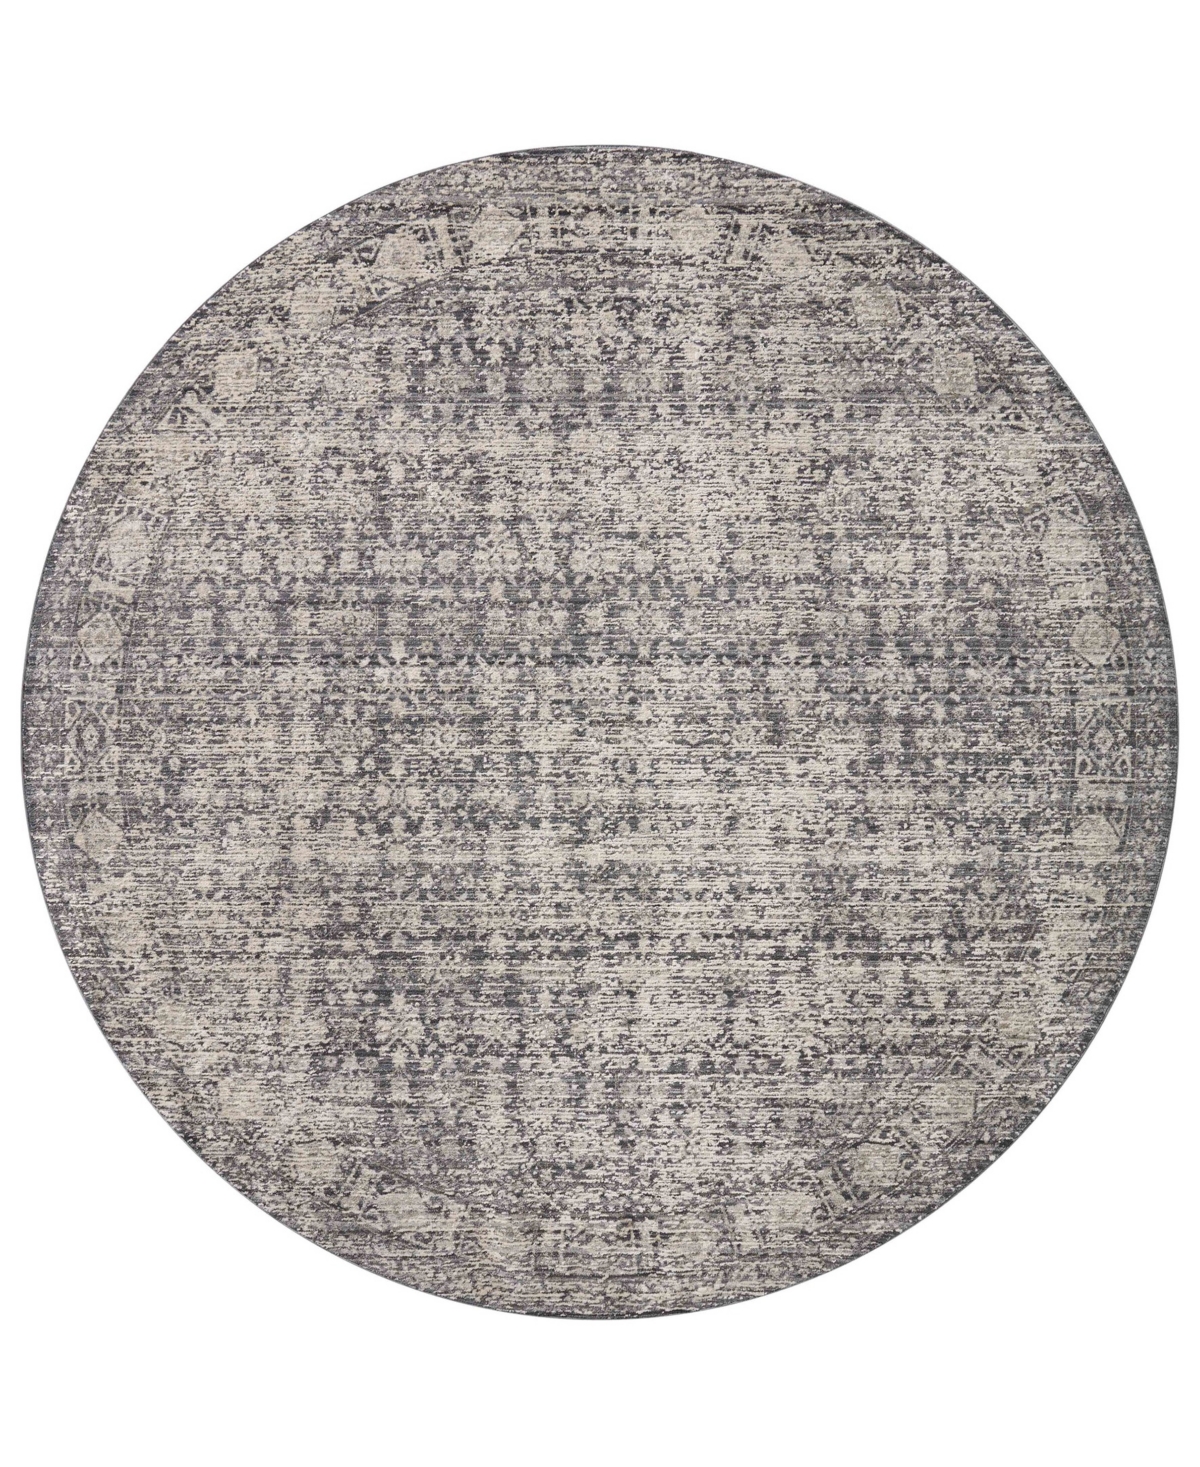 Amber Lewis X Loloi Alie Ale-03 5'3" X 5'3" Round Area Rug In Charcoal